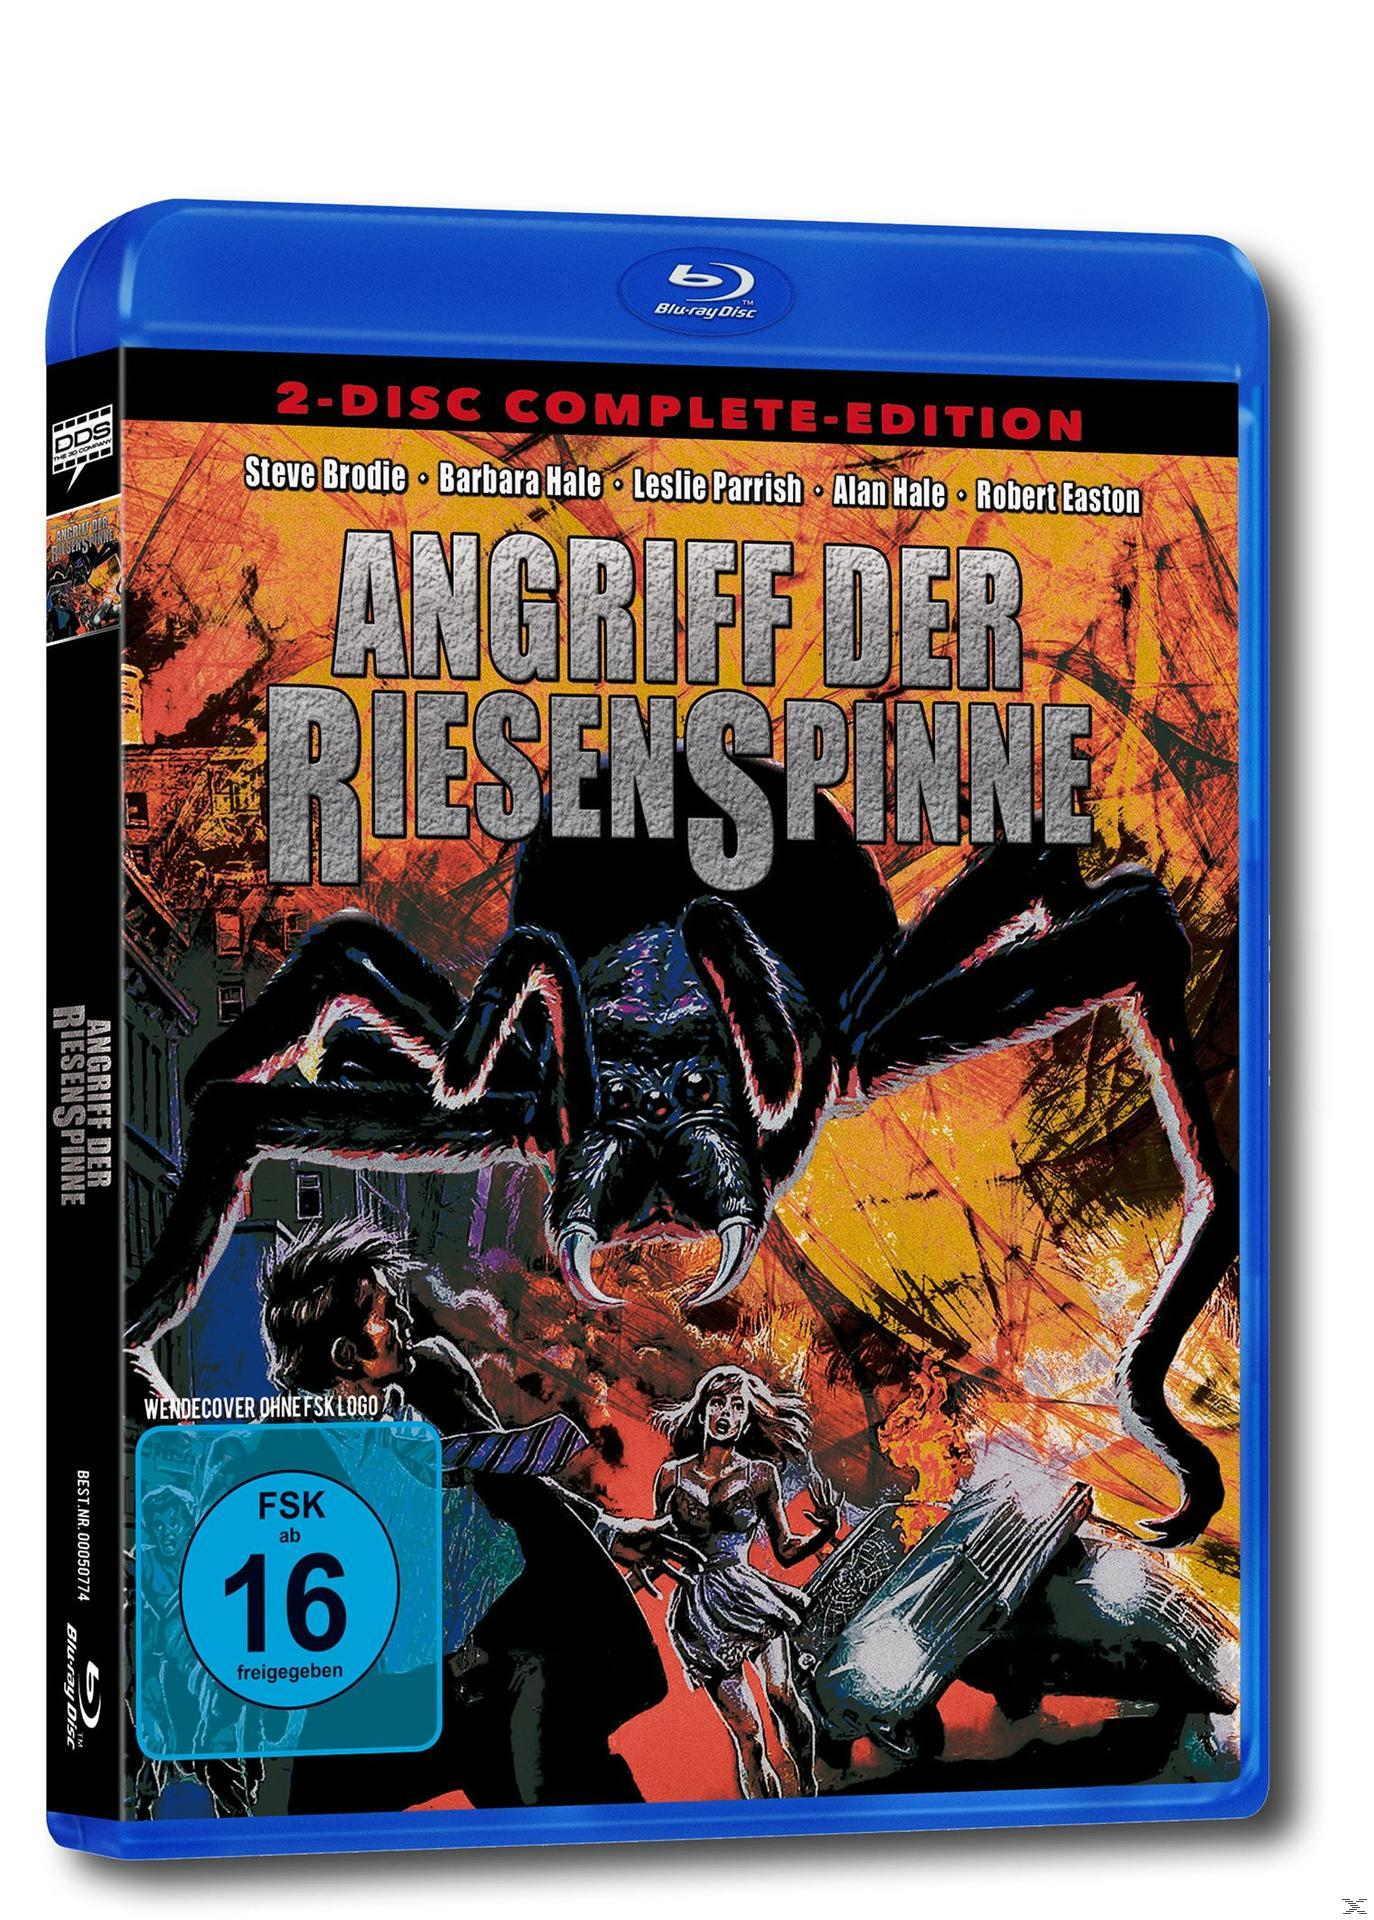 Edition Blu-ray Angriff - Riesenspinne Complete der